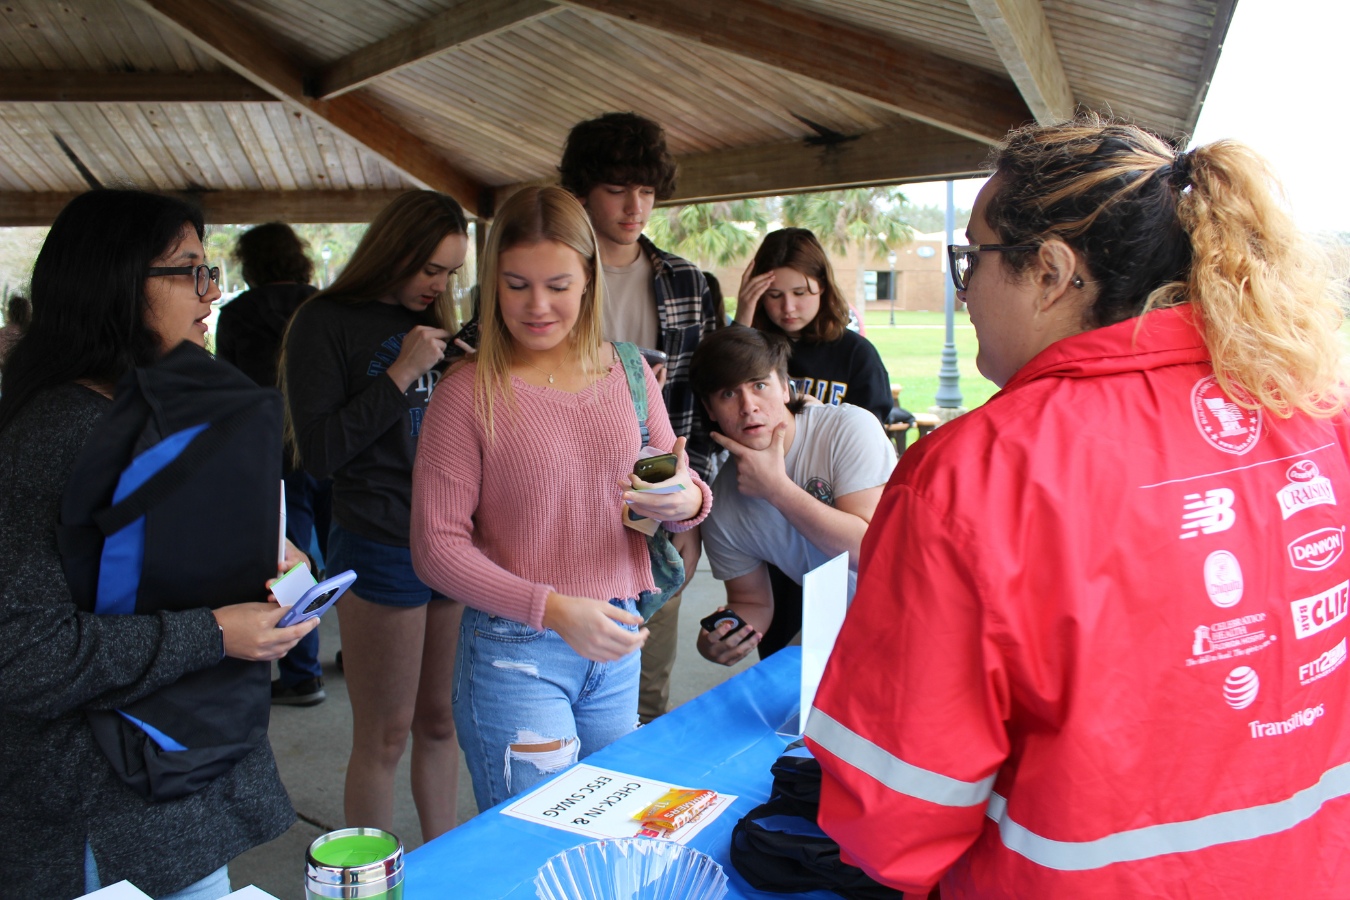 Students lined up at a booth during an event to check-in